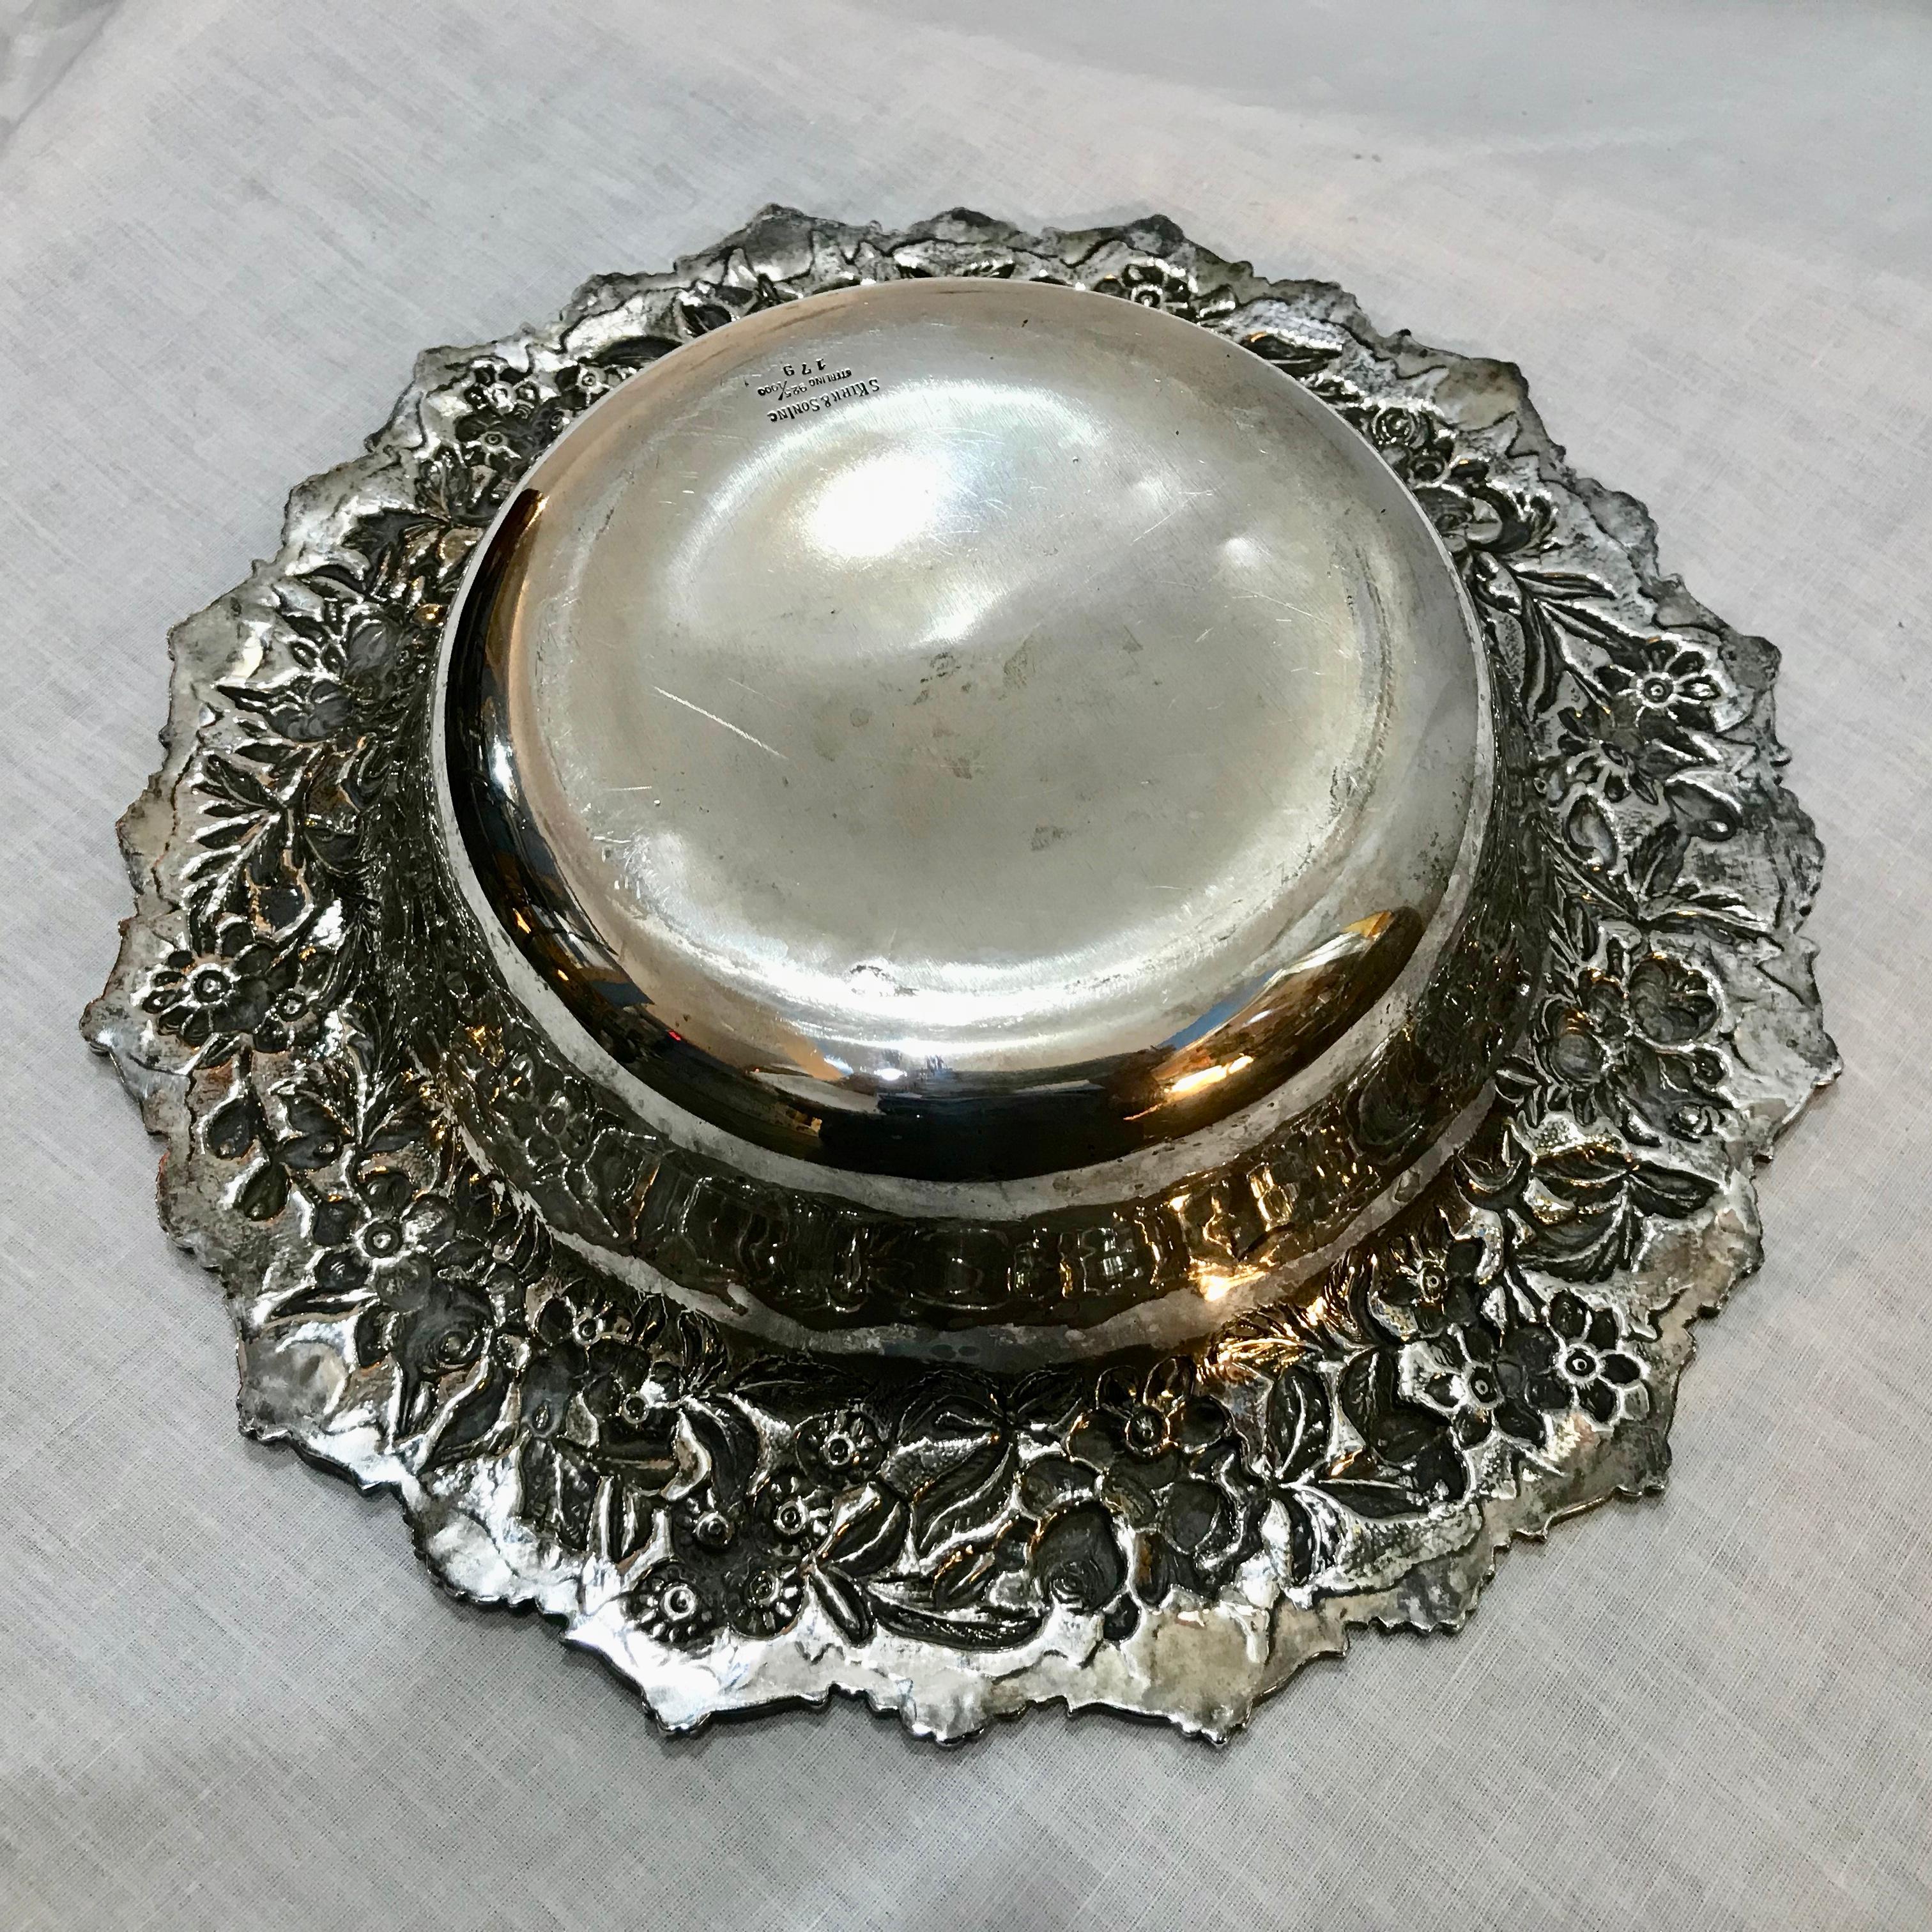 S Kirk & Sons Repousse Sterling Silver Center Bowl 6